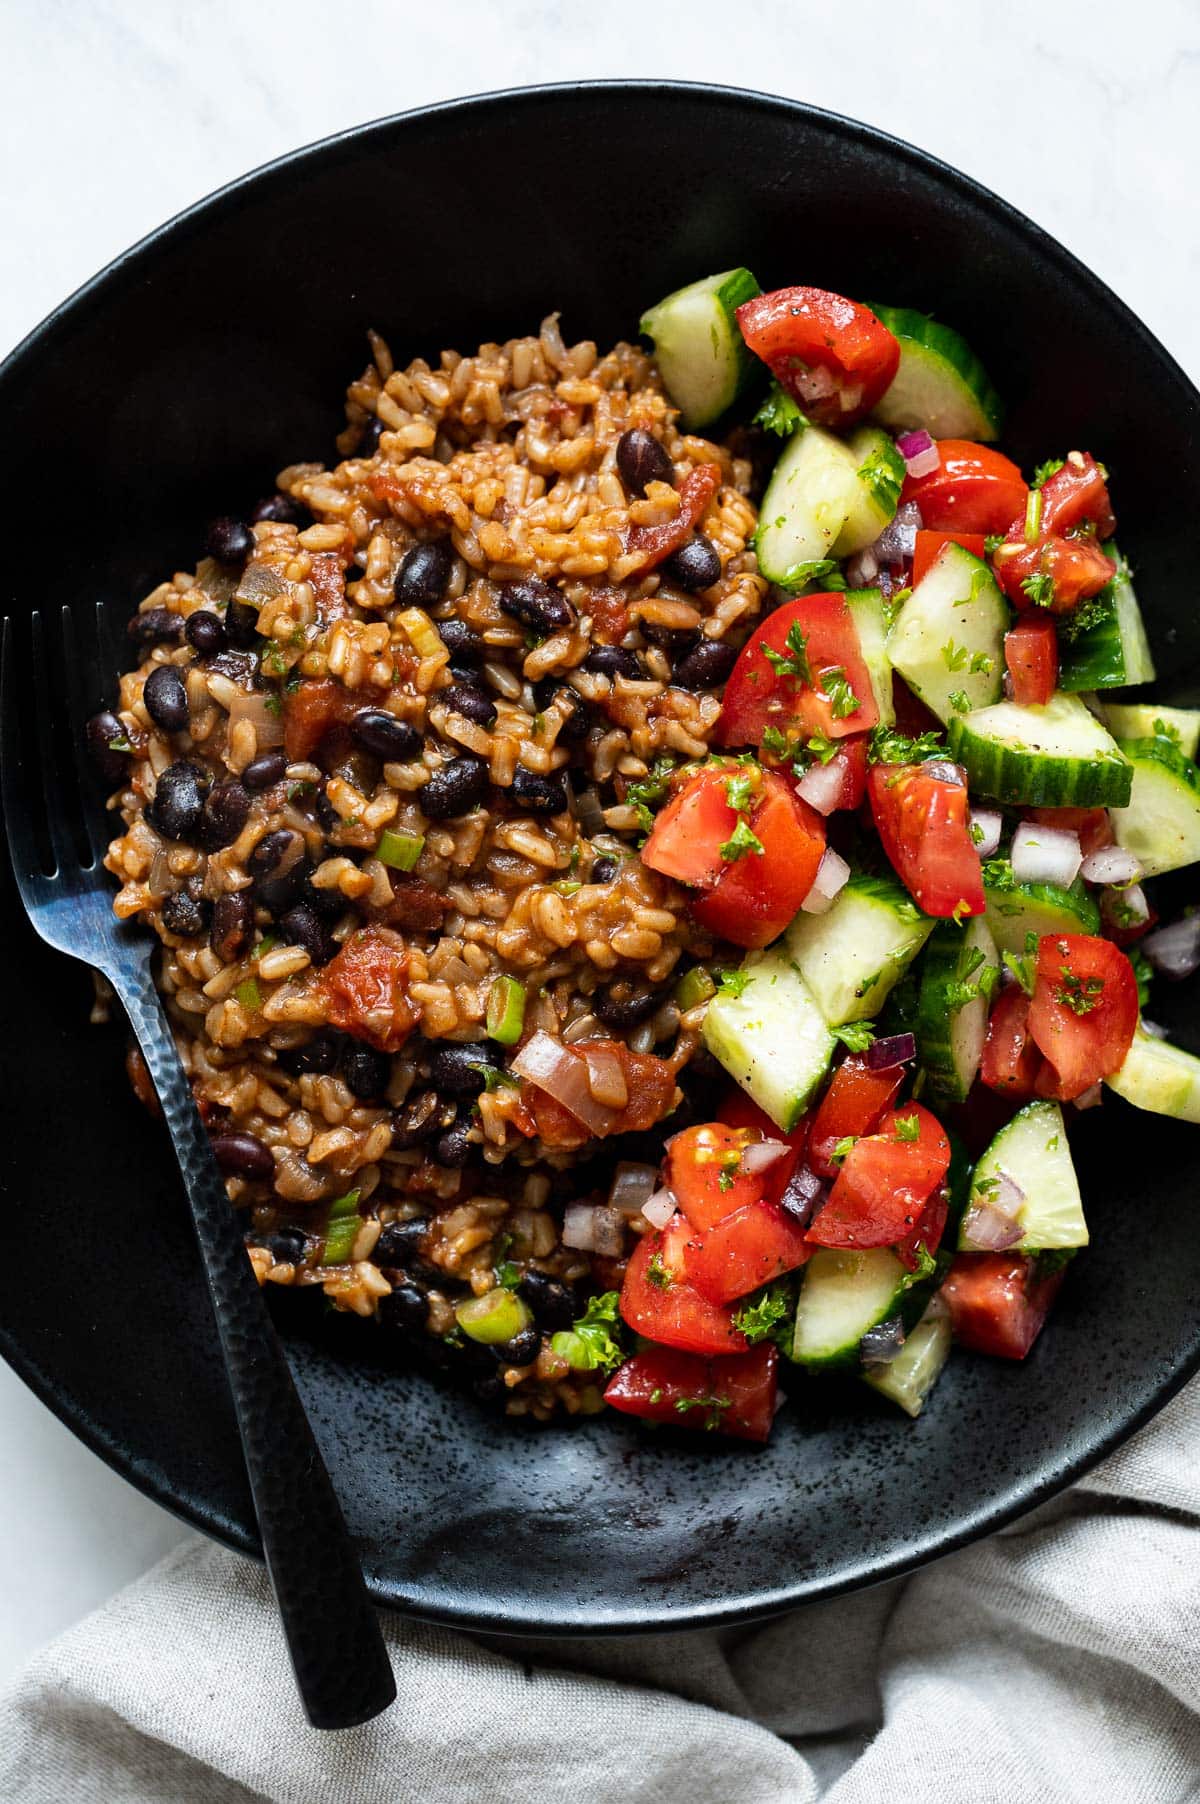 Instant Pot rice and beans with cucumber tomato salad on black plate with a fork.